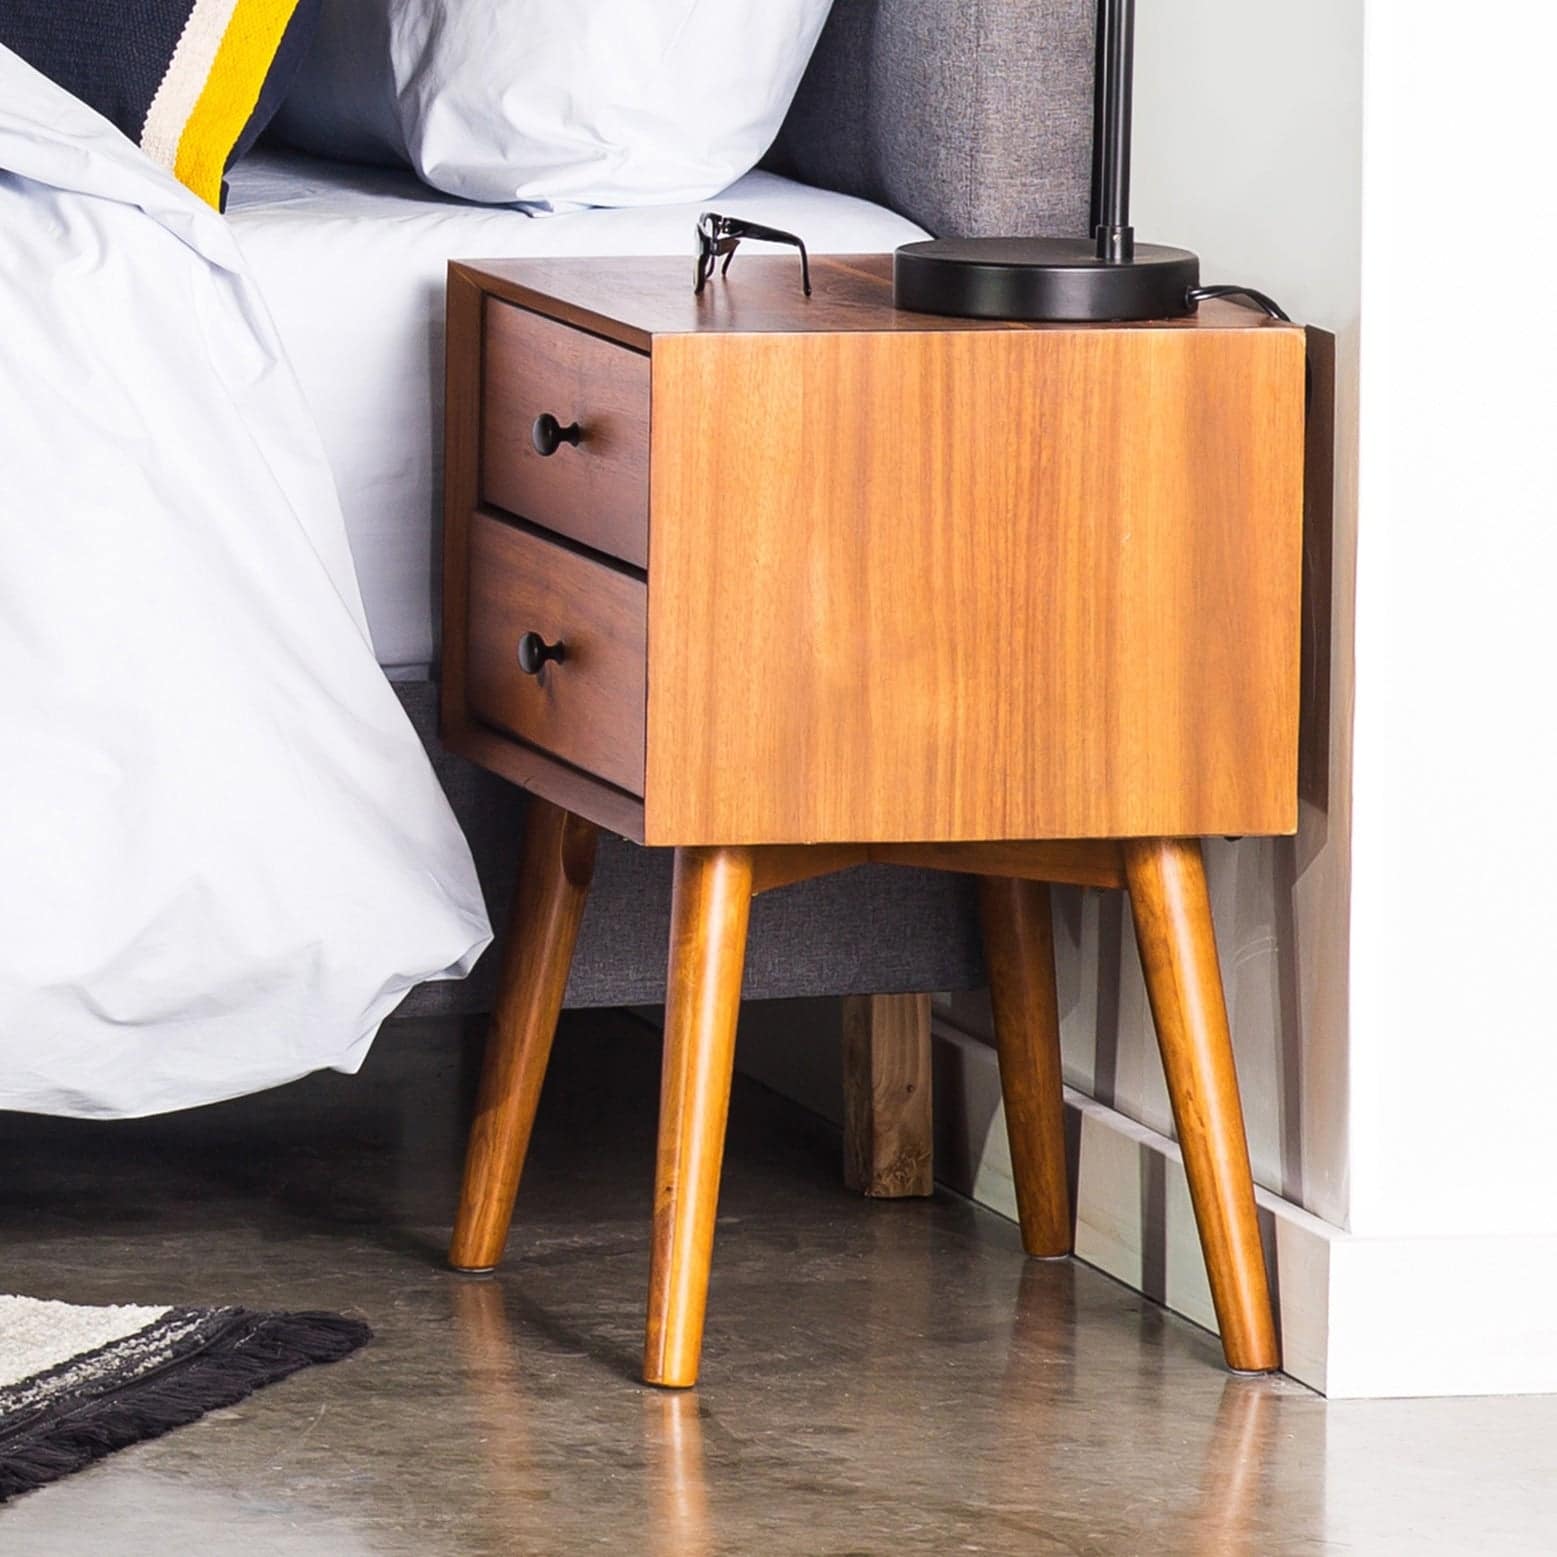 Add Function to Your Bedroom with Retro Nightstands